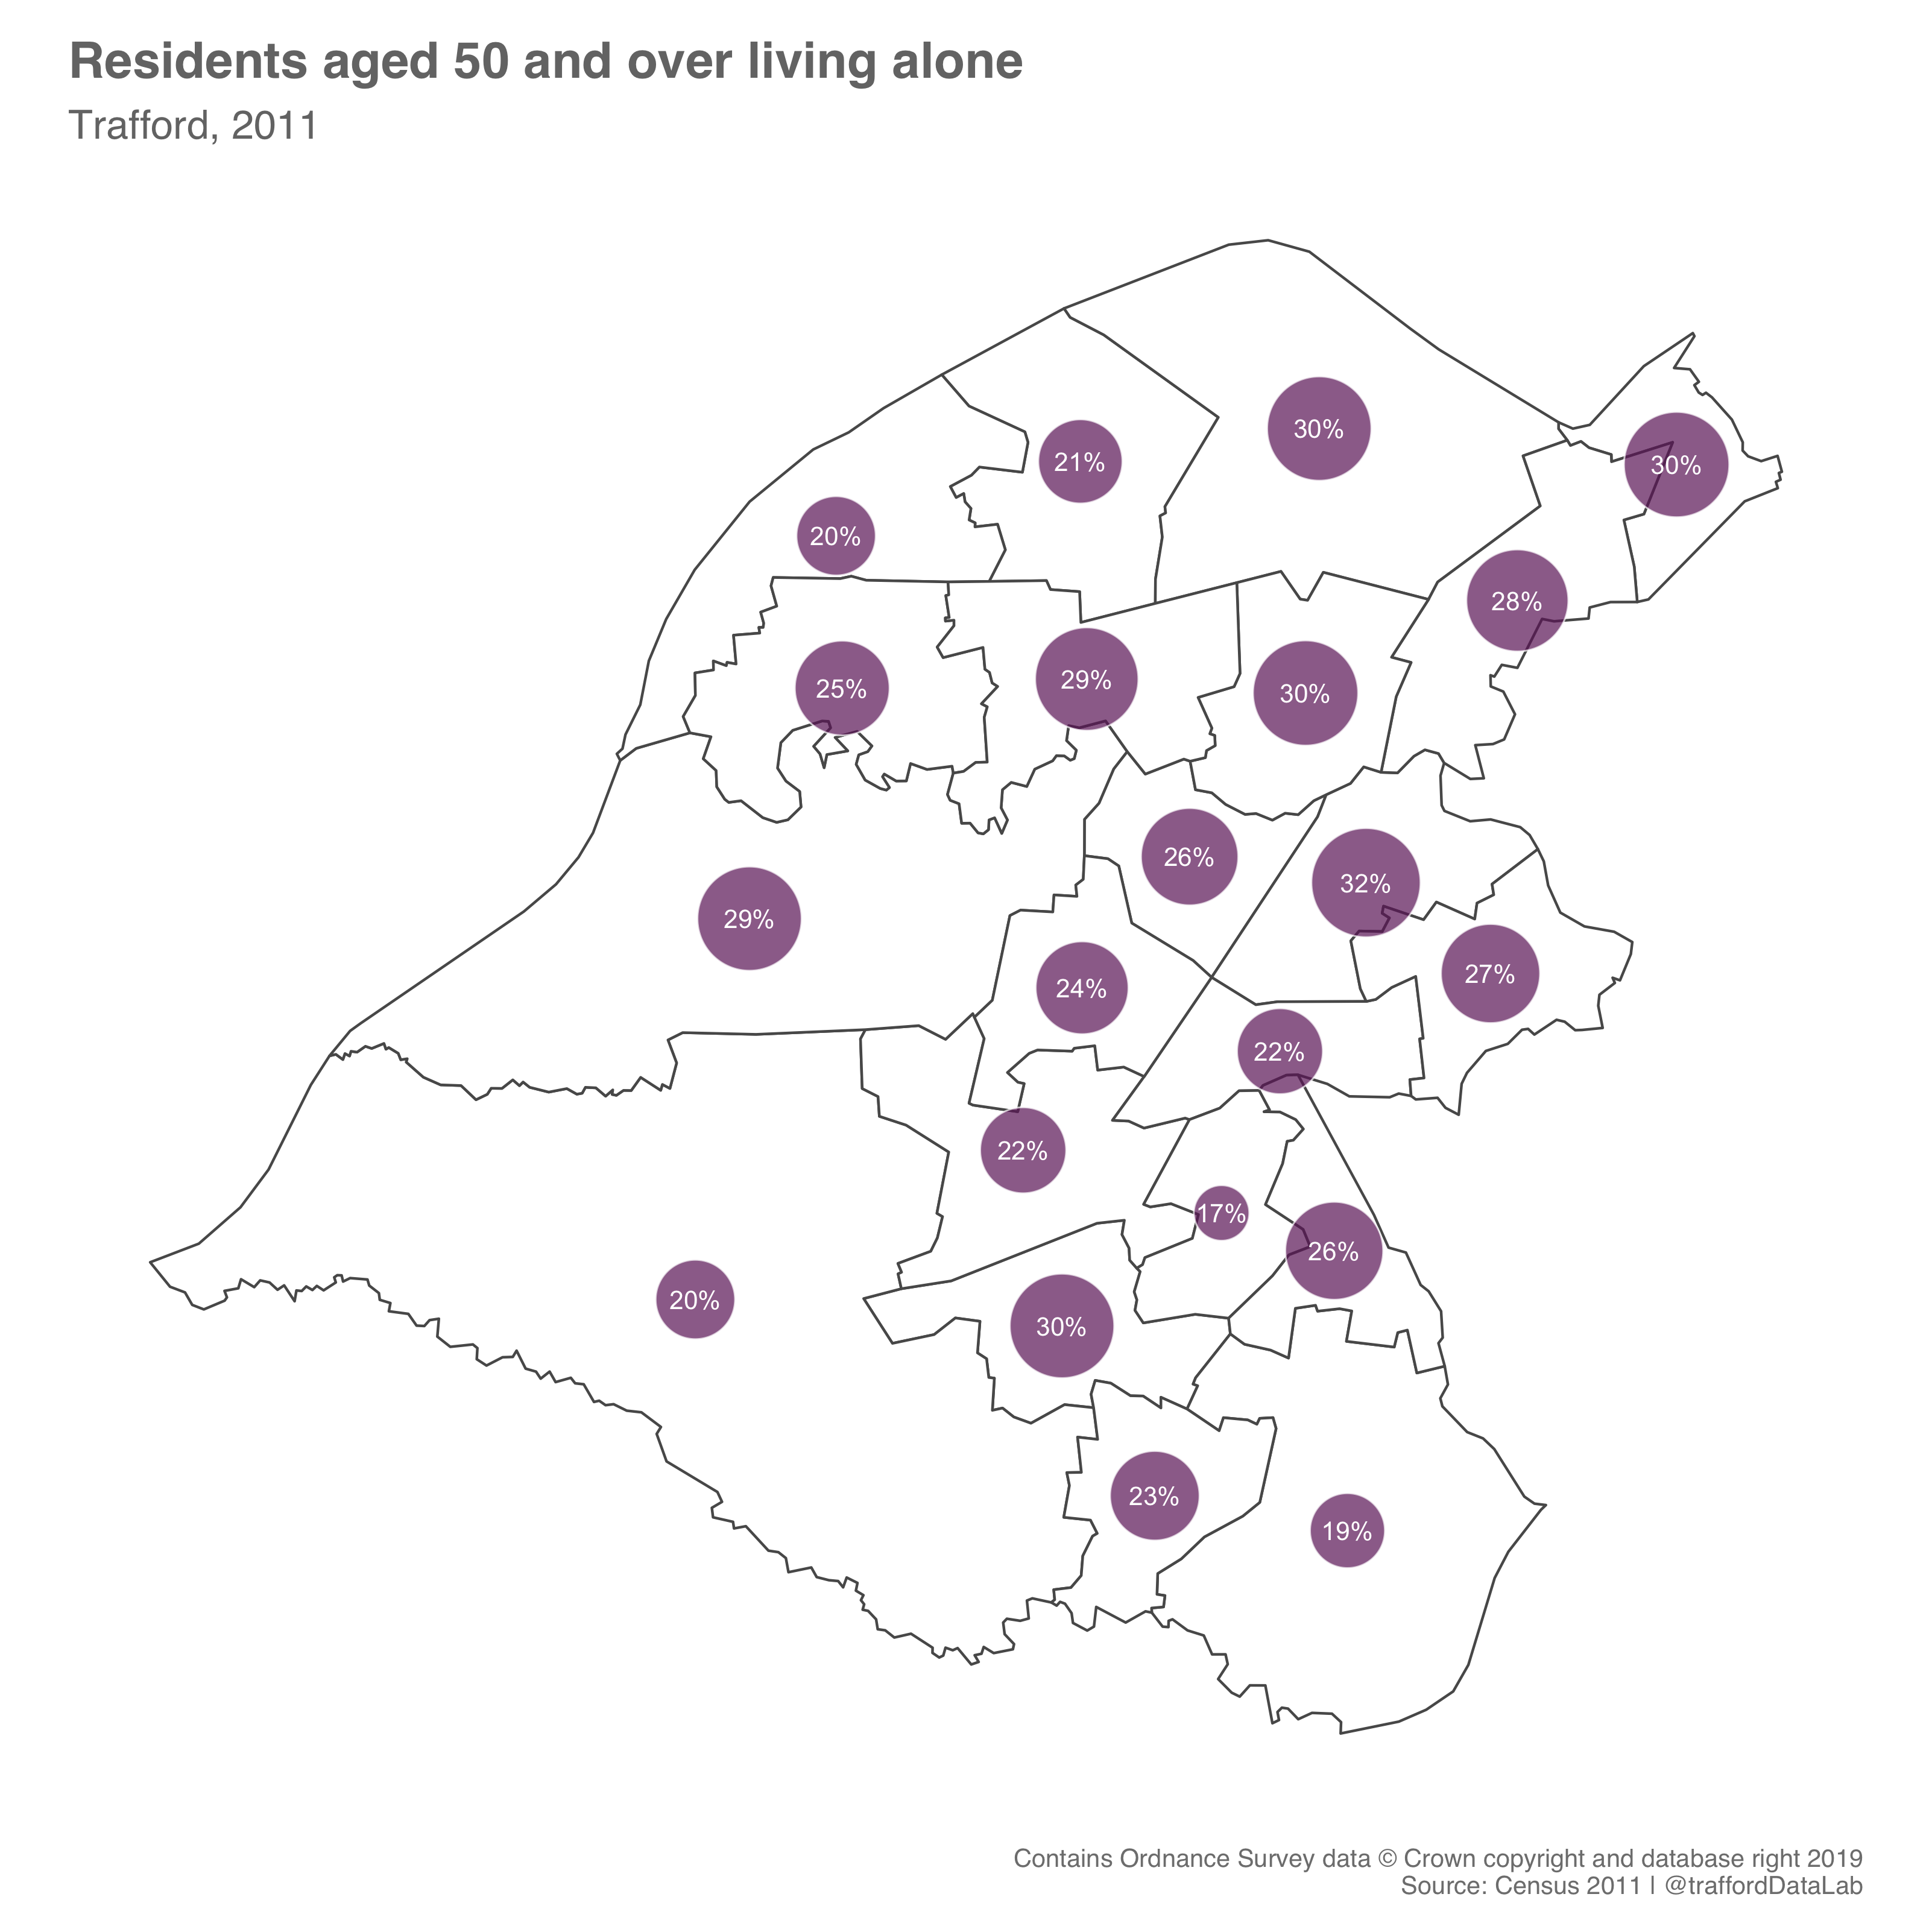 Proportion of Trafford residents aged 50 and over living alone in each electoral ward, 2011.